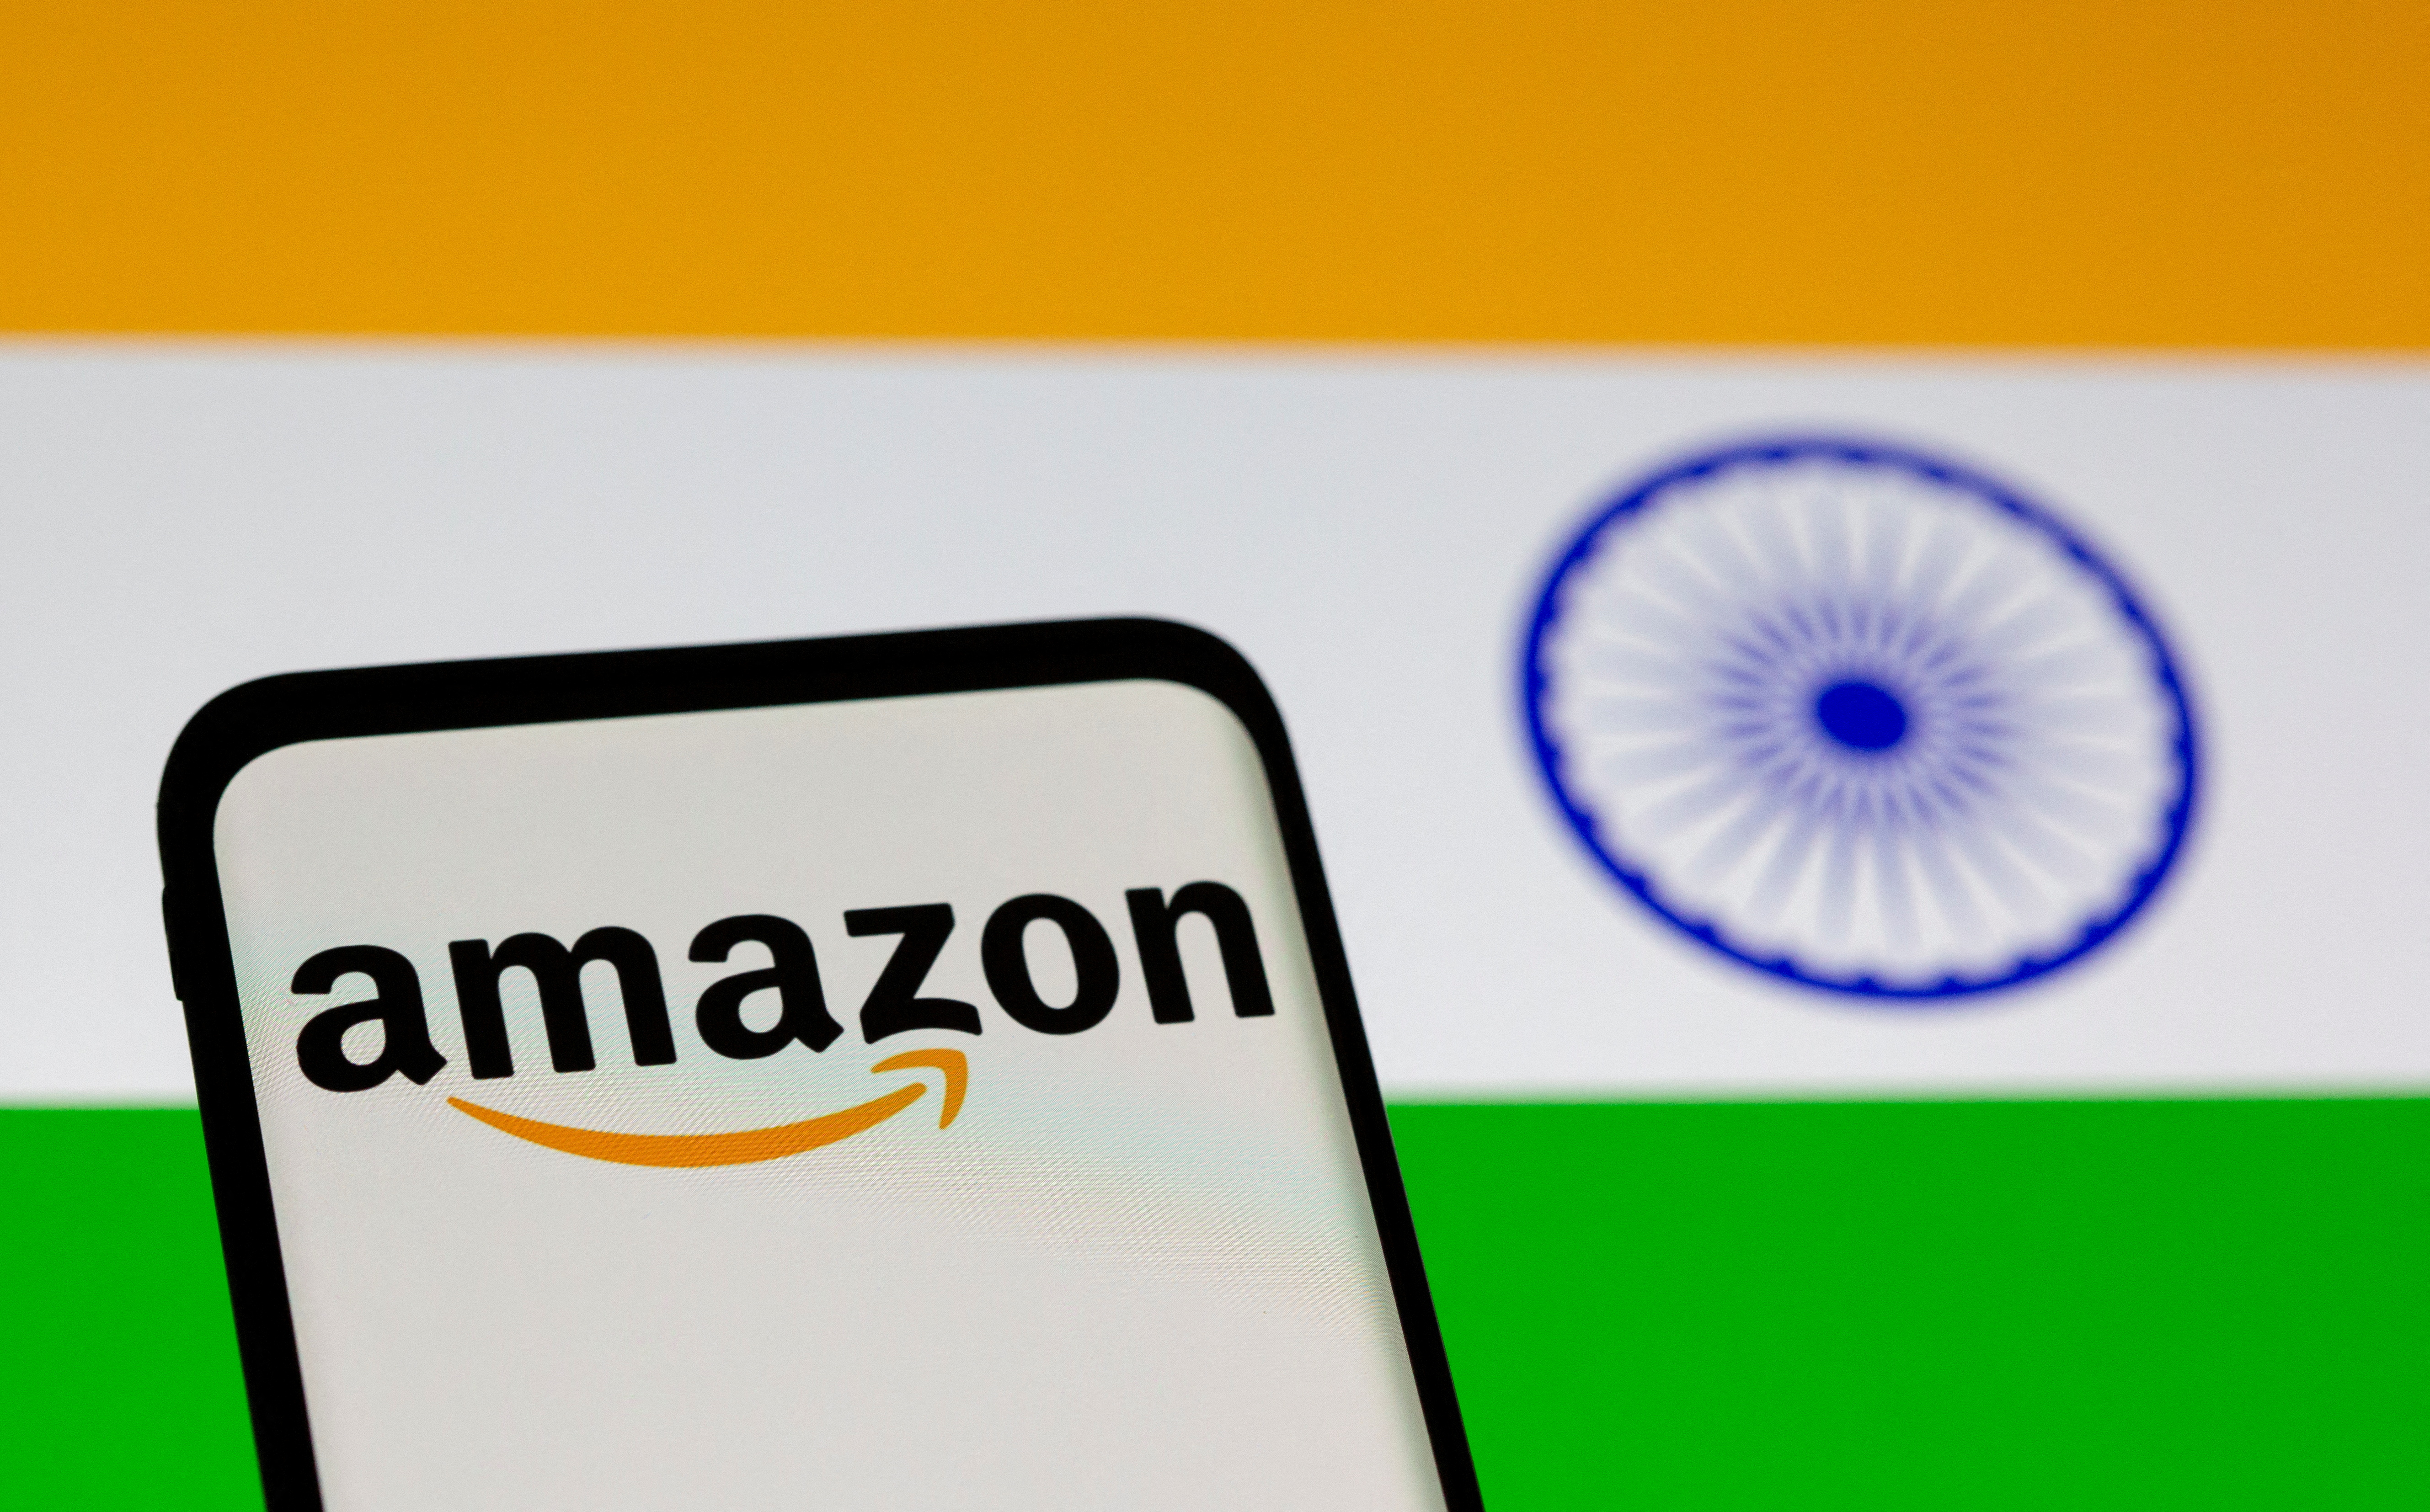 Smartphone with Amazon logo is seen in front of displayed Indian flag in this illustration taken